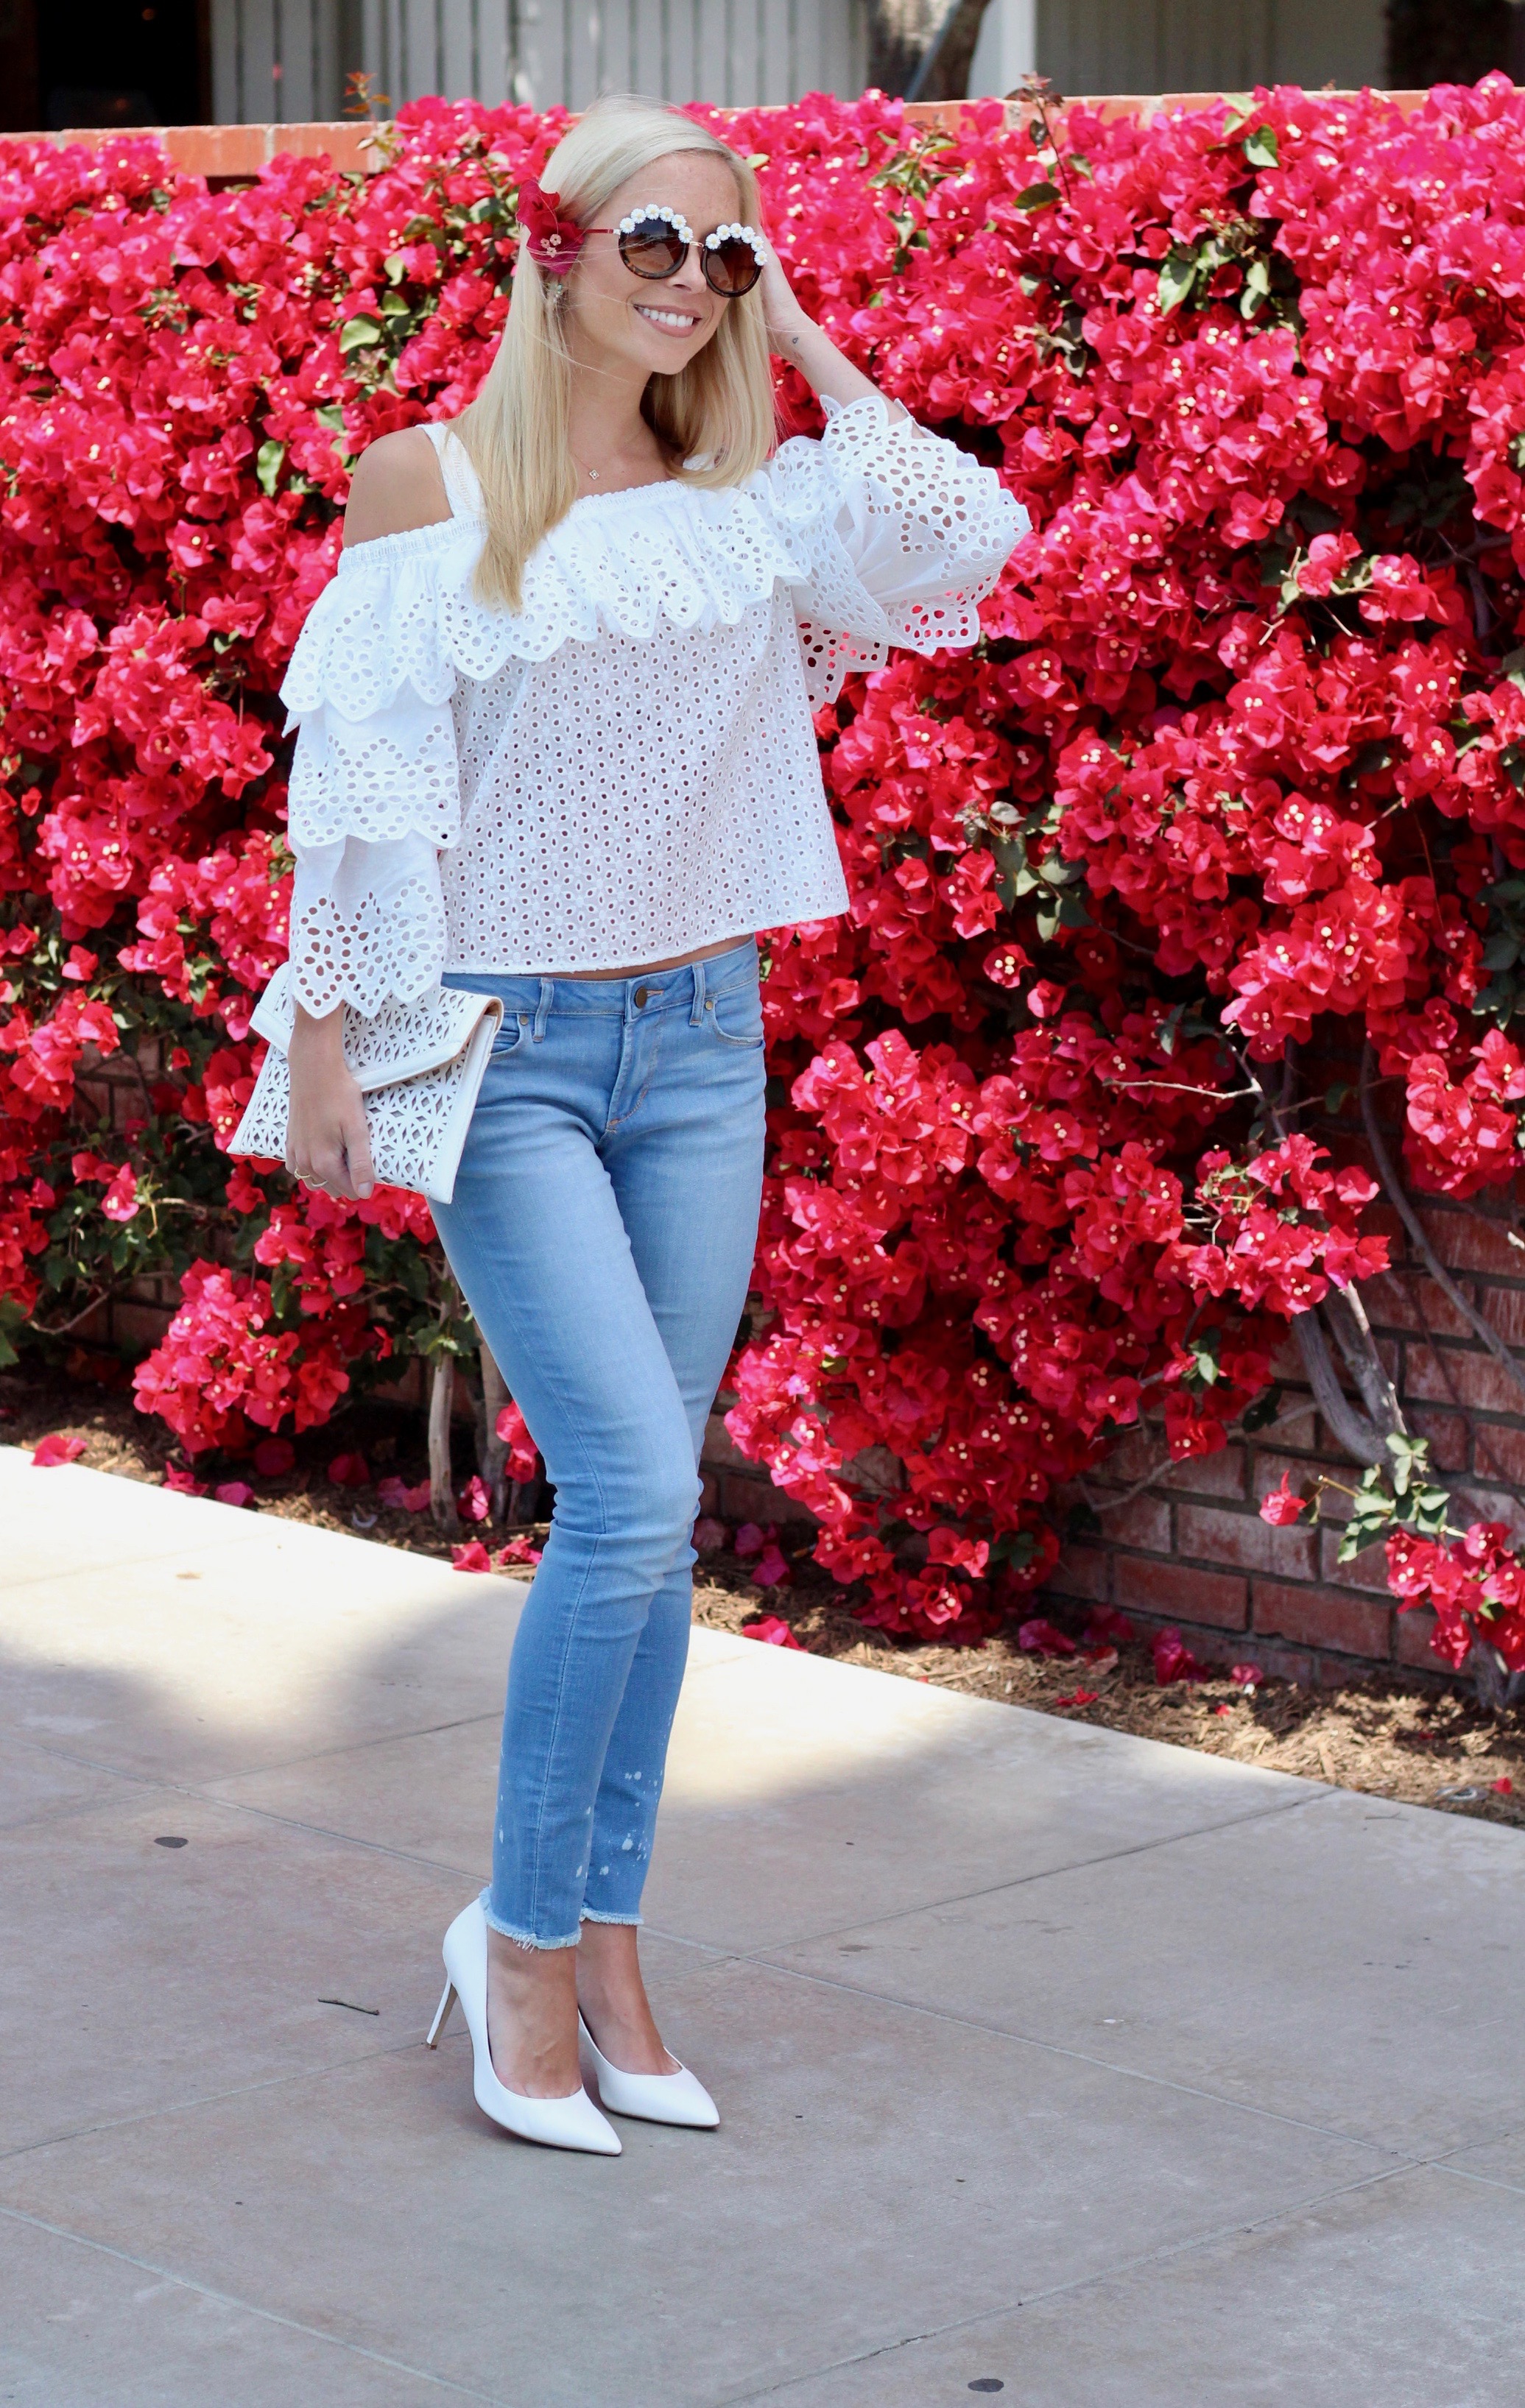 White Eyelet Top from Endless Rose & Articles of Society Jeans